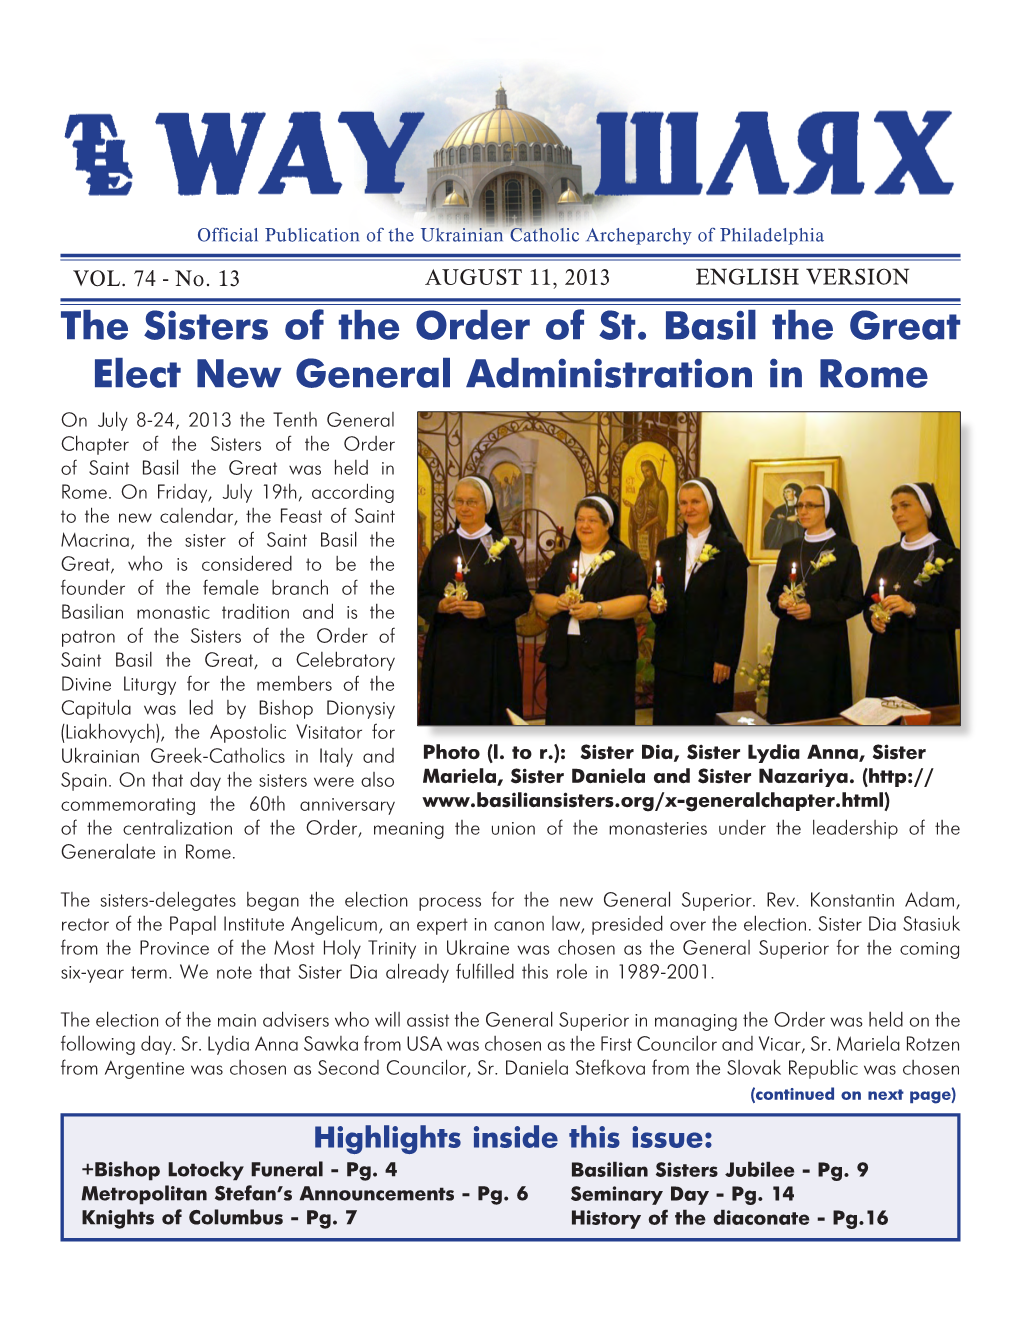 The Sisters of the Order of St. Basil the Great Elect New General